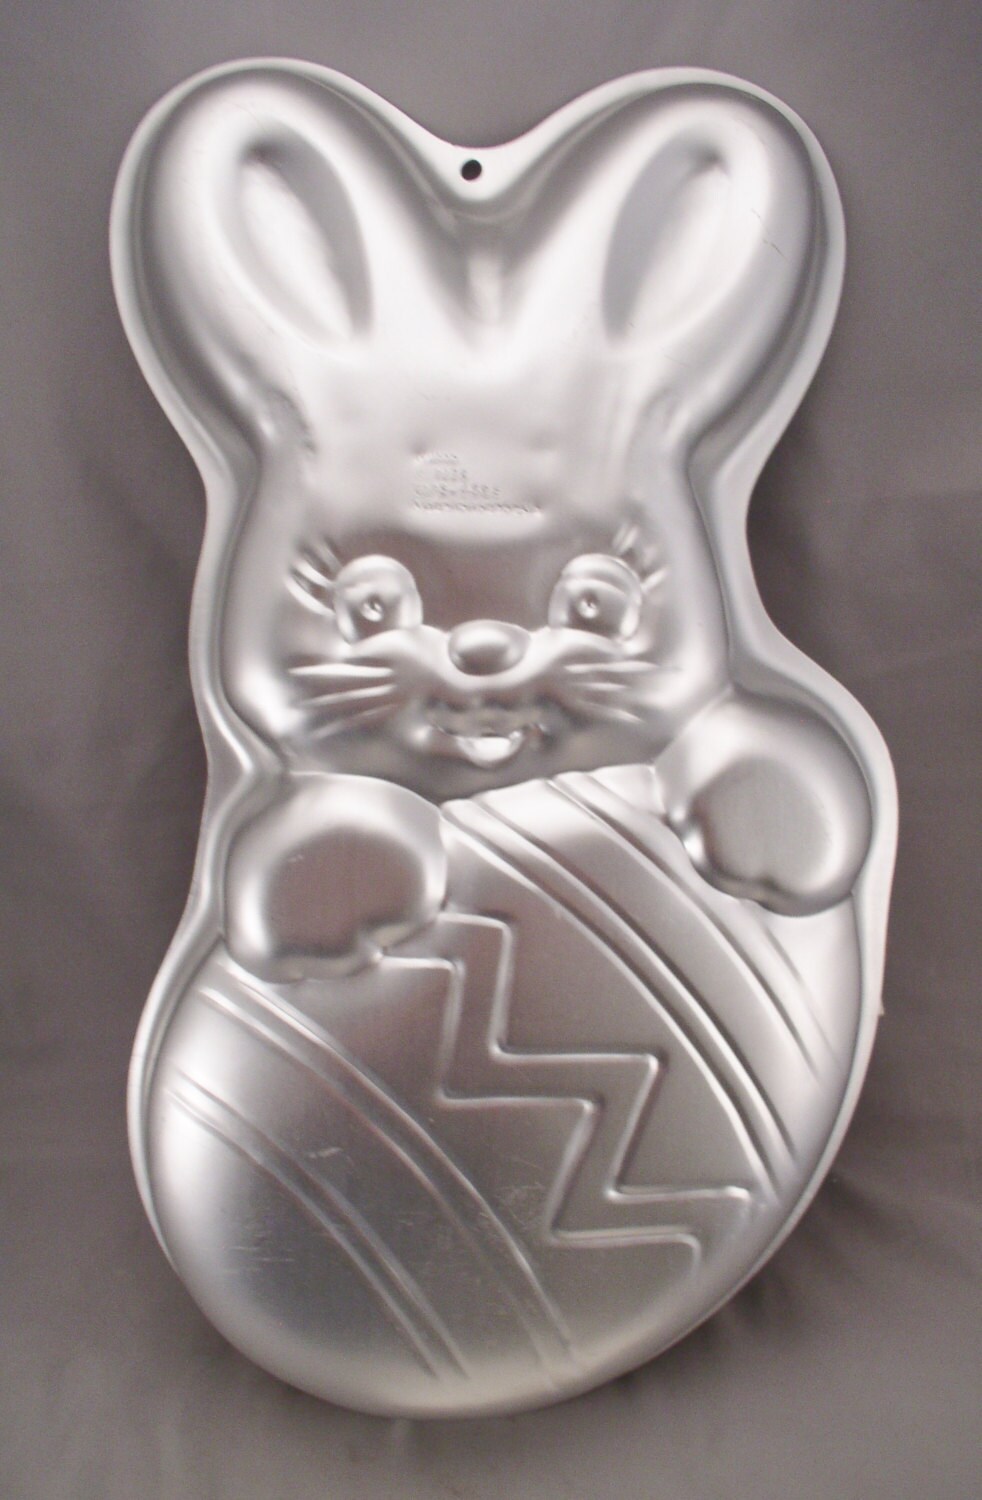 Wilton Peek-A-Boo Bunny Cake Pan with Instructions Easter | Etsy